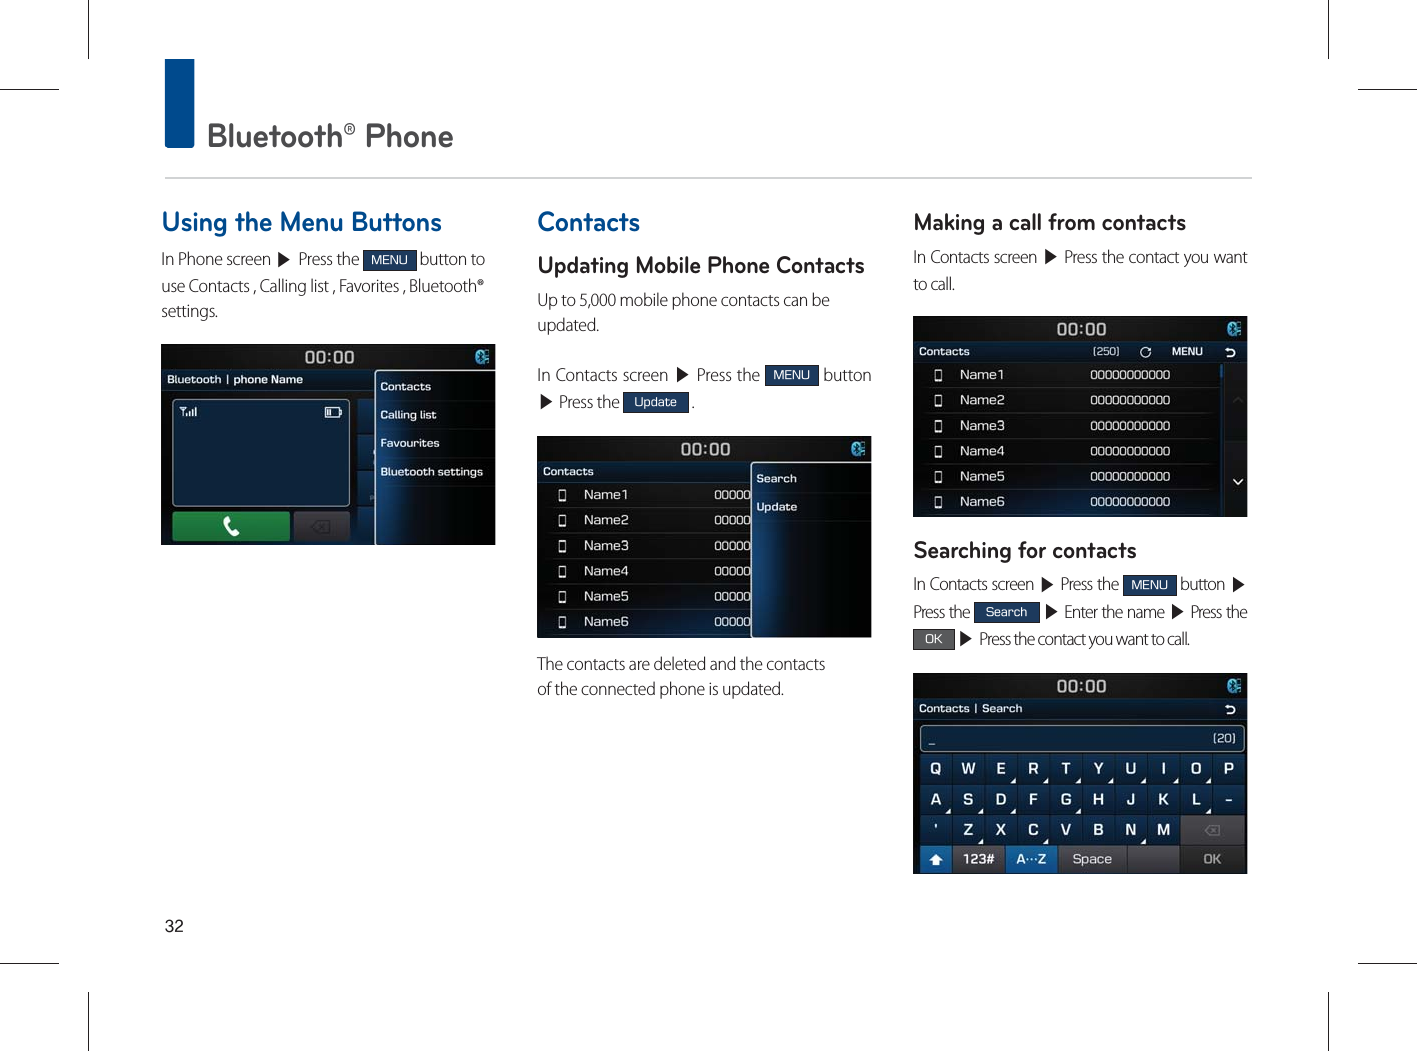  Bluetooth® PhoneUsing the Menu ButtonsIn Phone screen ▶ Press the .&amp;/6 button to use Contacts , Calling list , Favorites , Bluetooth® settings.ContactsUpdating Mobile Phone ContactsUp to 5,000 mobile phone contacts can beupdated.In Contacts screen ▶ Press the .&amp;/6 button  ▶ Press the 6QEBUF .The contacts are deleted and the contactsof the connected phone is updated.Making a call from contactsIn Contacts screen ▶ Press the contact you want to call.Searching for contactsIn Contacts screen ▶ Press the .&amp;/6 button ▶ Press the 4FBSDI ▶ Enter the name ▶ Press the 0, ▶ Press the contact you want to call.